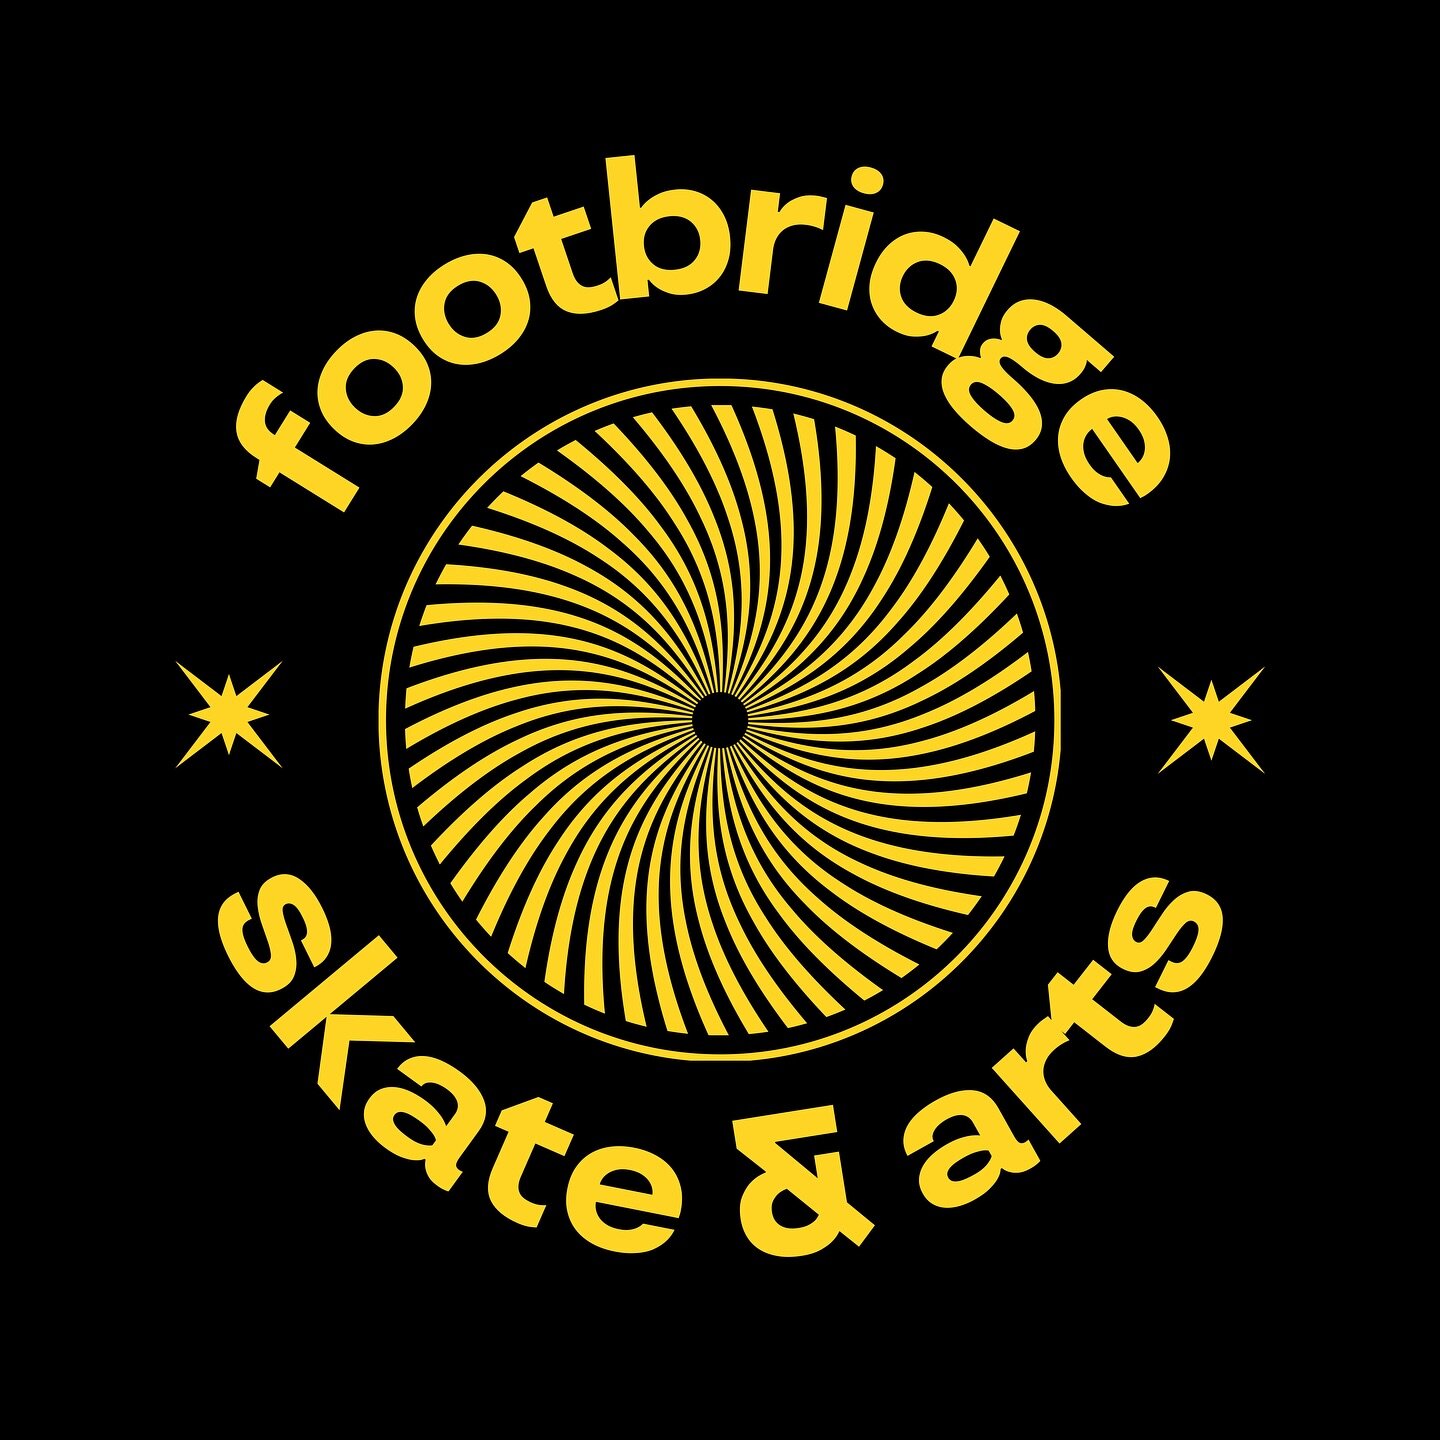 Ok people, please read below and sign!
We need your help and it costs $0!

Sign the petition BY DECEMBER 7th telling the NJDEP to let us build the Footbridge Skate + Arts Park in Footbridge Park! More details at link!

We've met with Senator Steven O